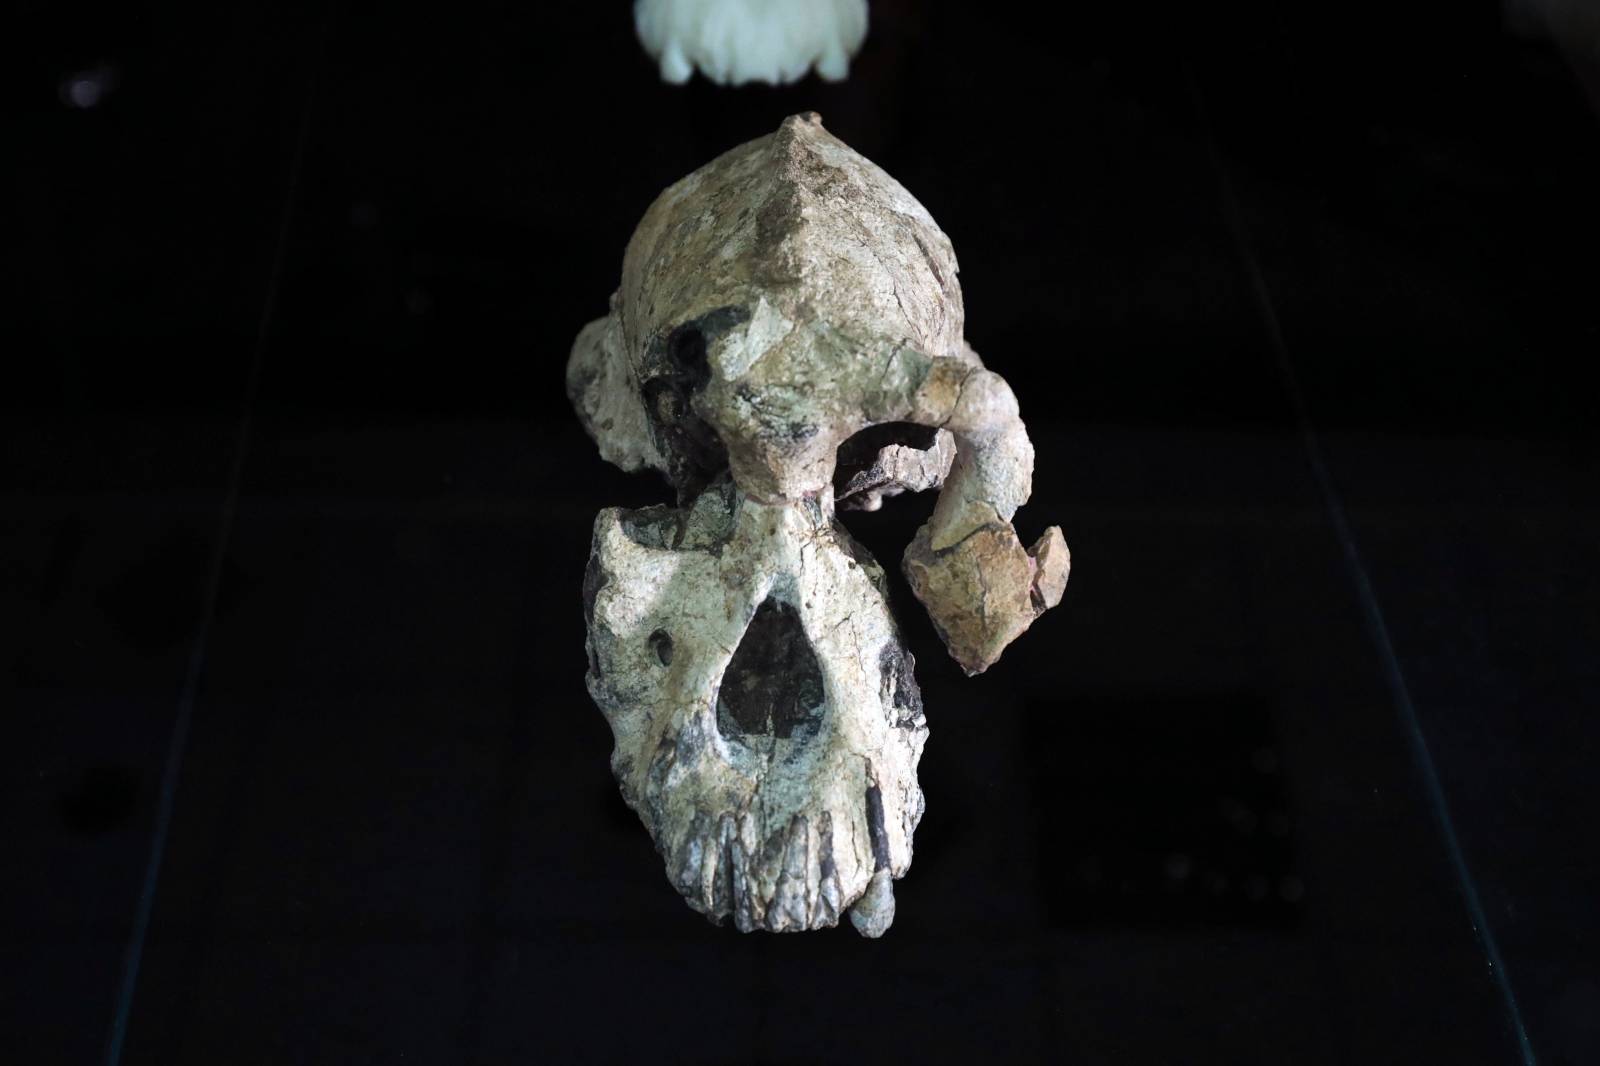 A fossil of Lucy's ancestor, 3.8 million years old cranium of Australopithecus Anamensis which was discovered in Waranso-Mile paleontological site, Afar region in Ethiopia is seen at the National Museum in Addis Ababa